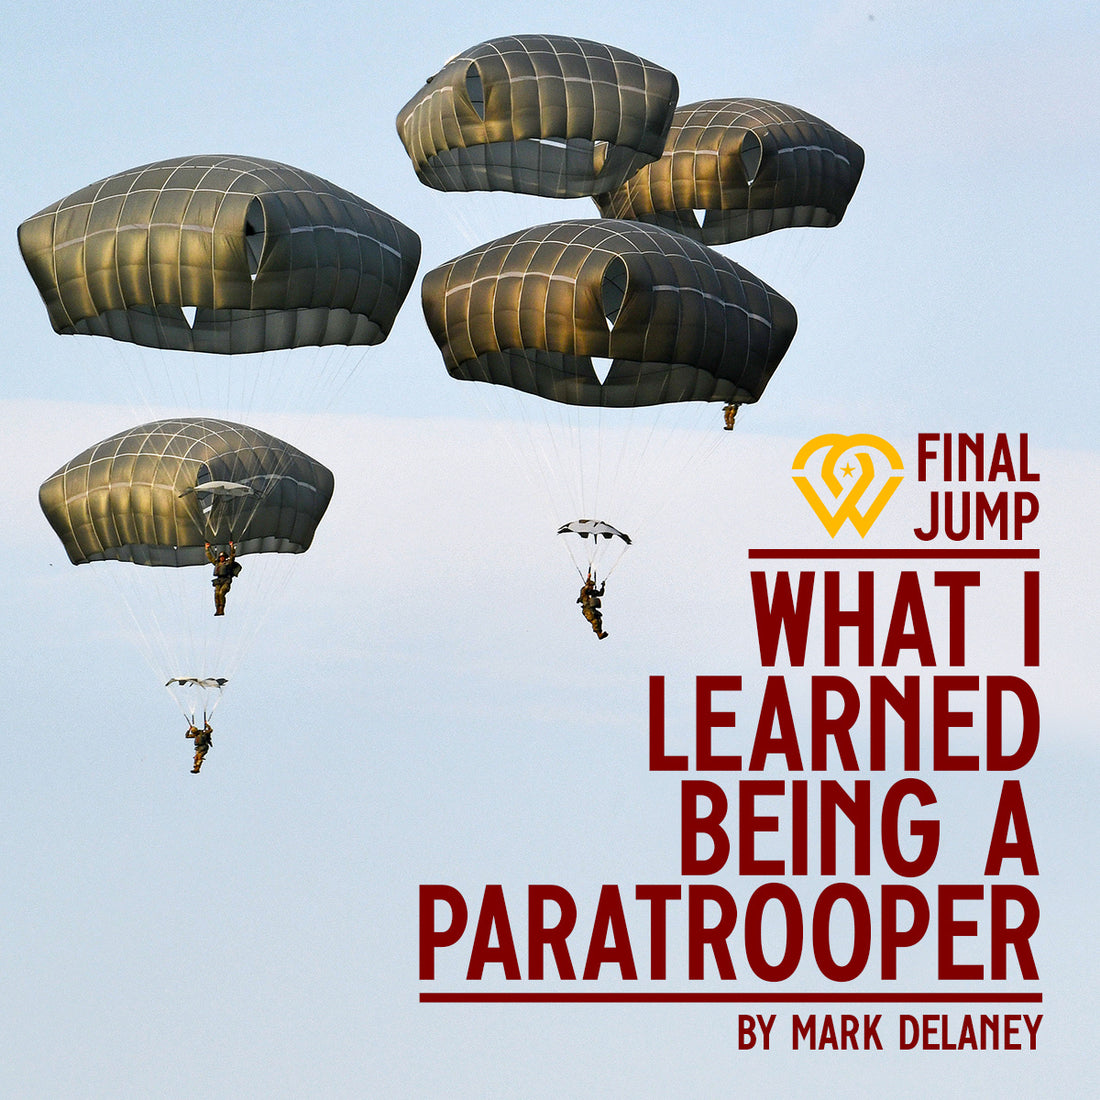 What I Learned Being a Paratrooper